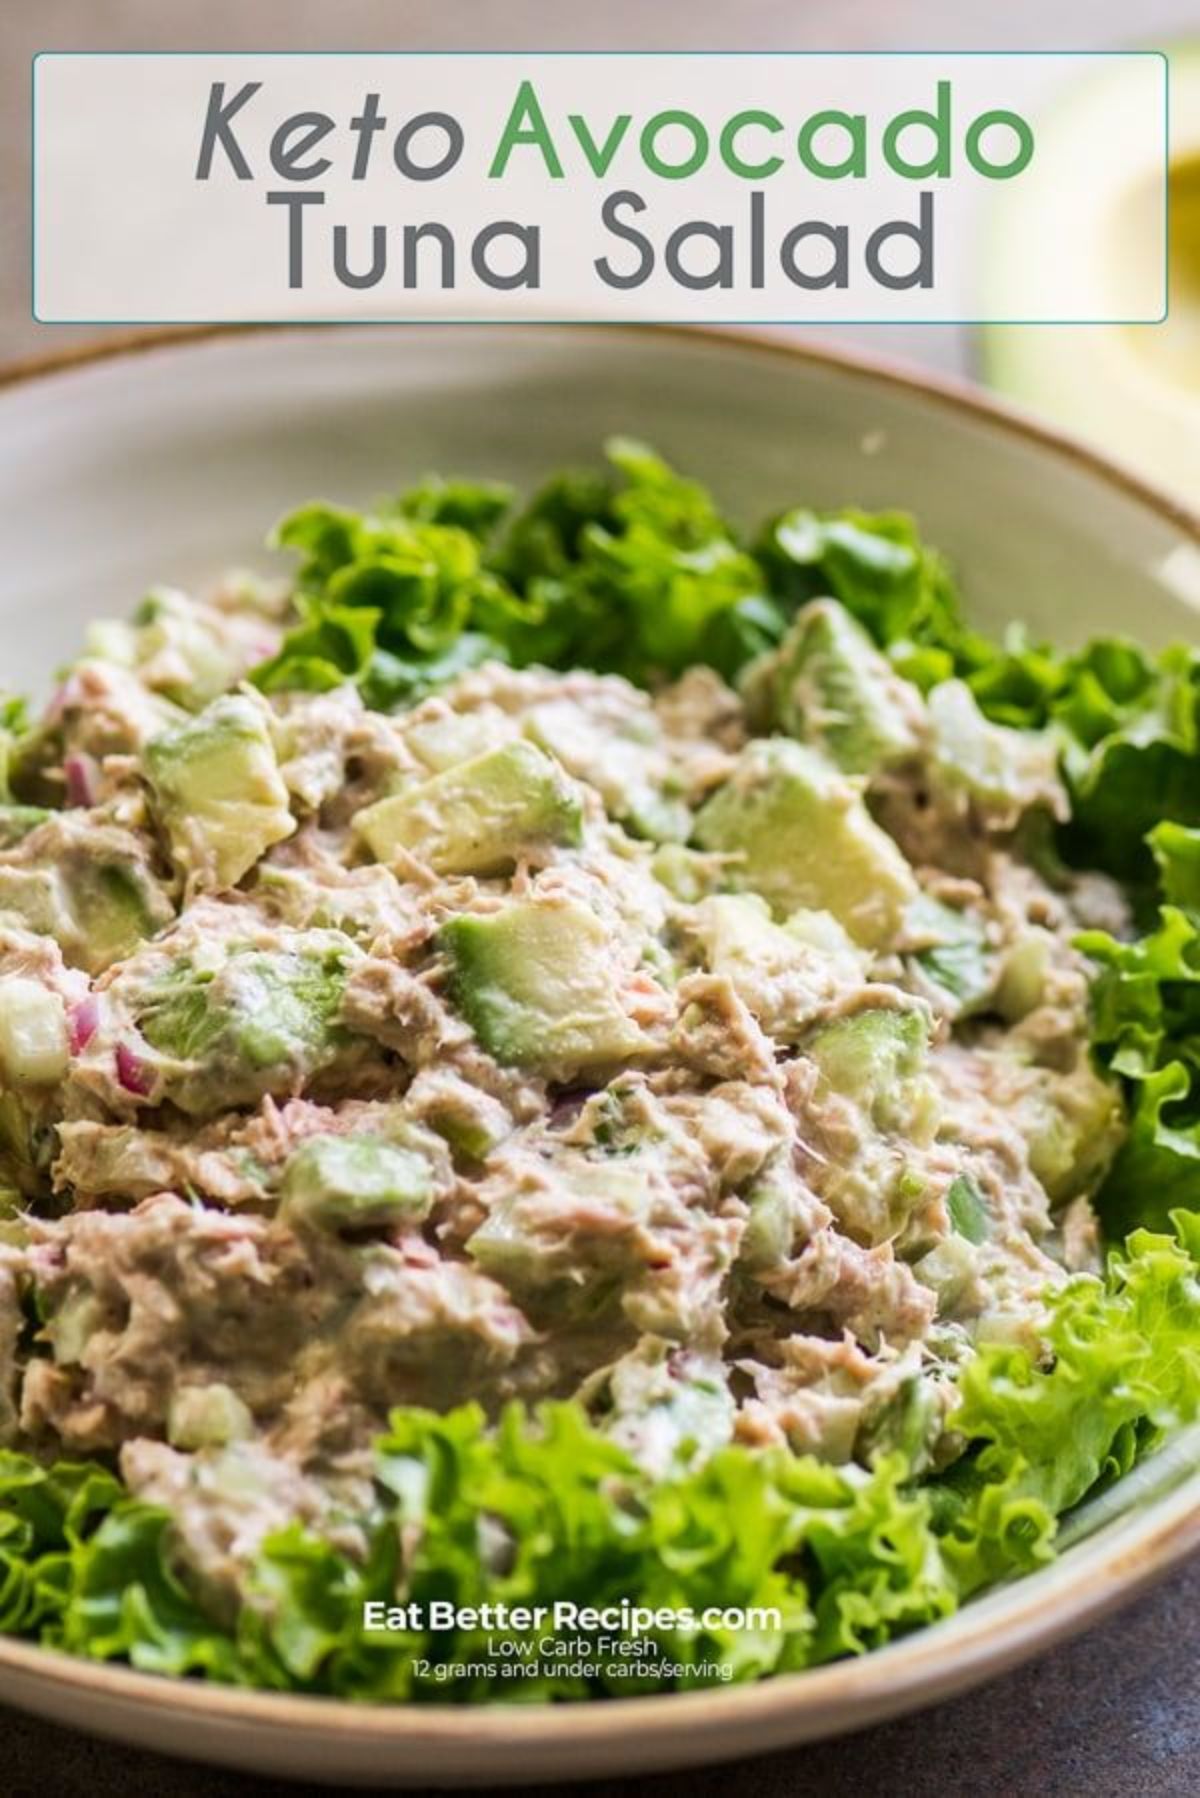 The text reads "Keto avocado tuna salad". The photo is of a pottery bowl with a bed of lettuce and a tuna avocado salad on top